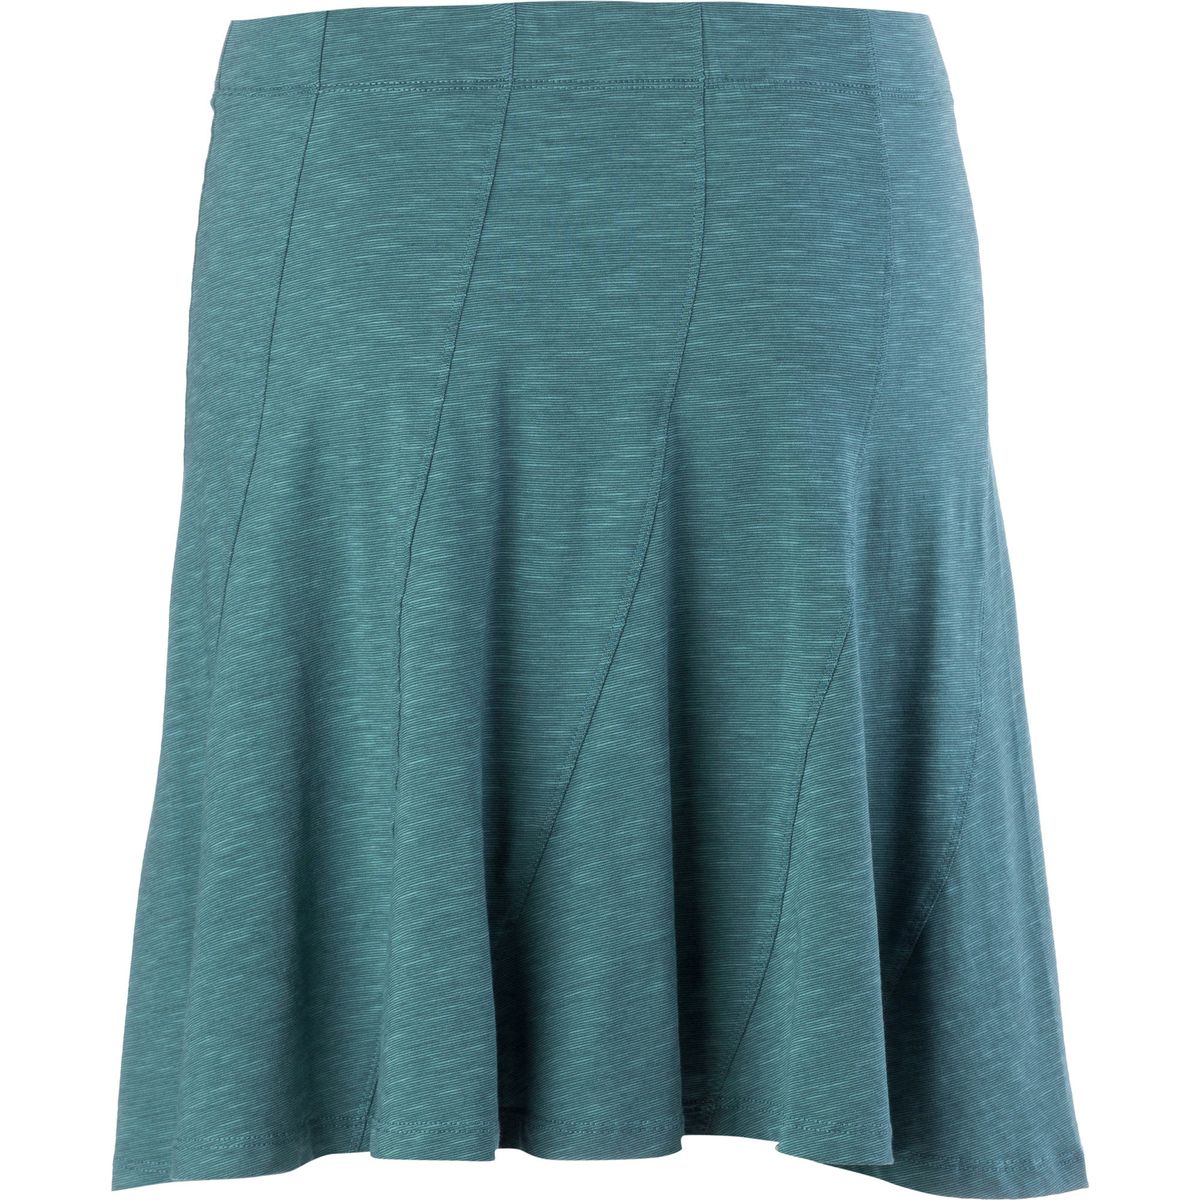 Toad&Co Chachacha Skirt - Women's | Backcountry.com